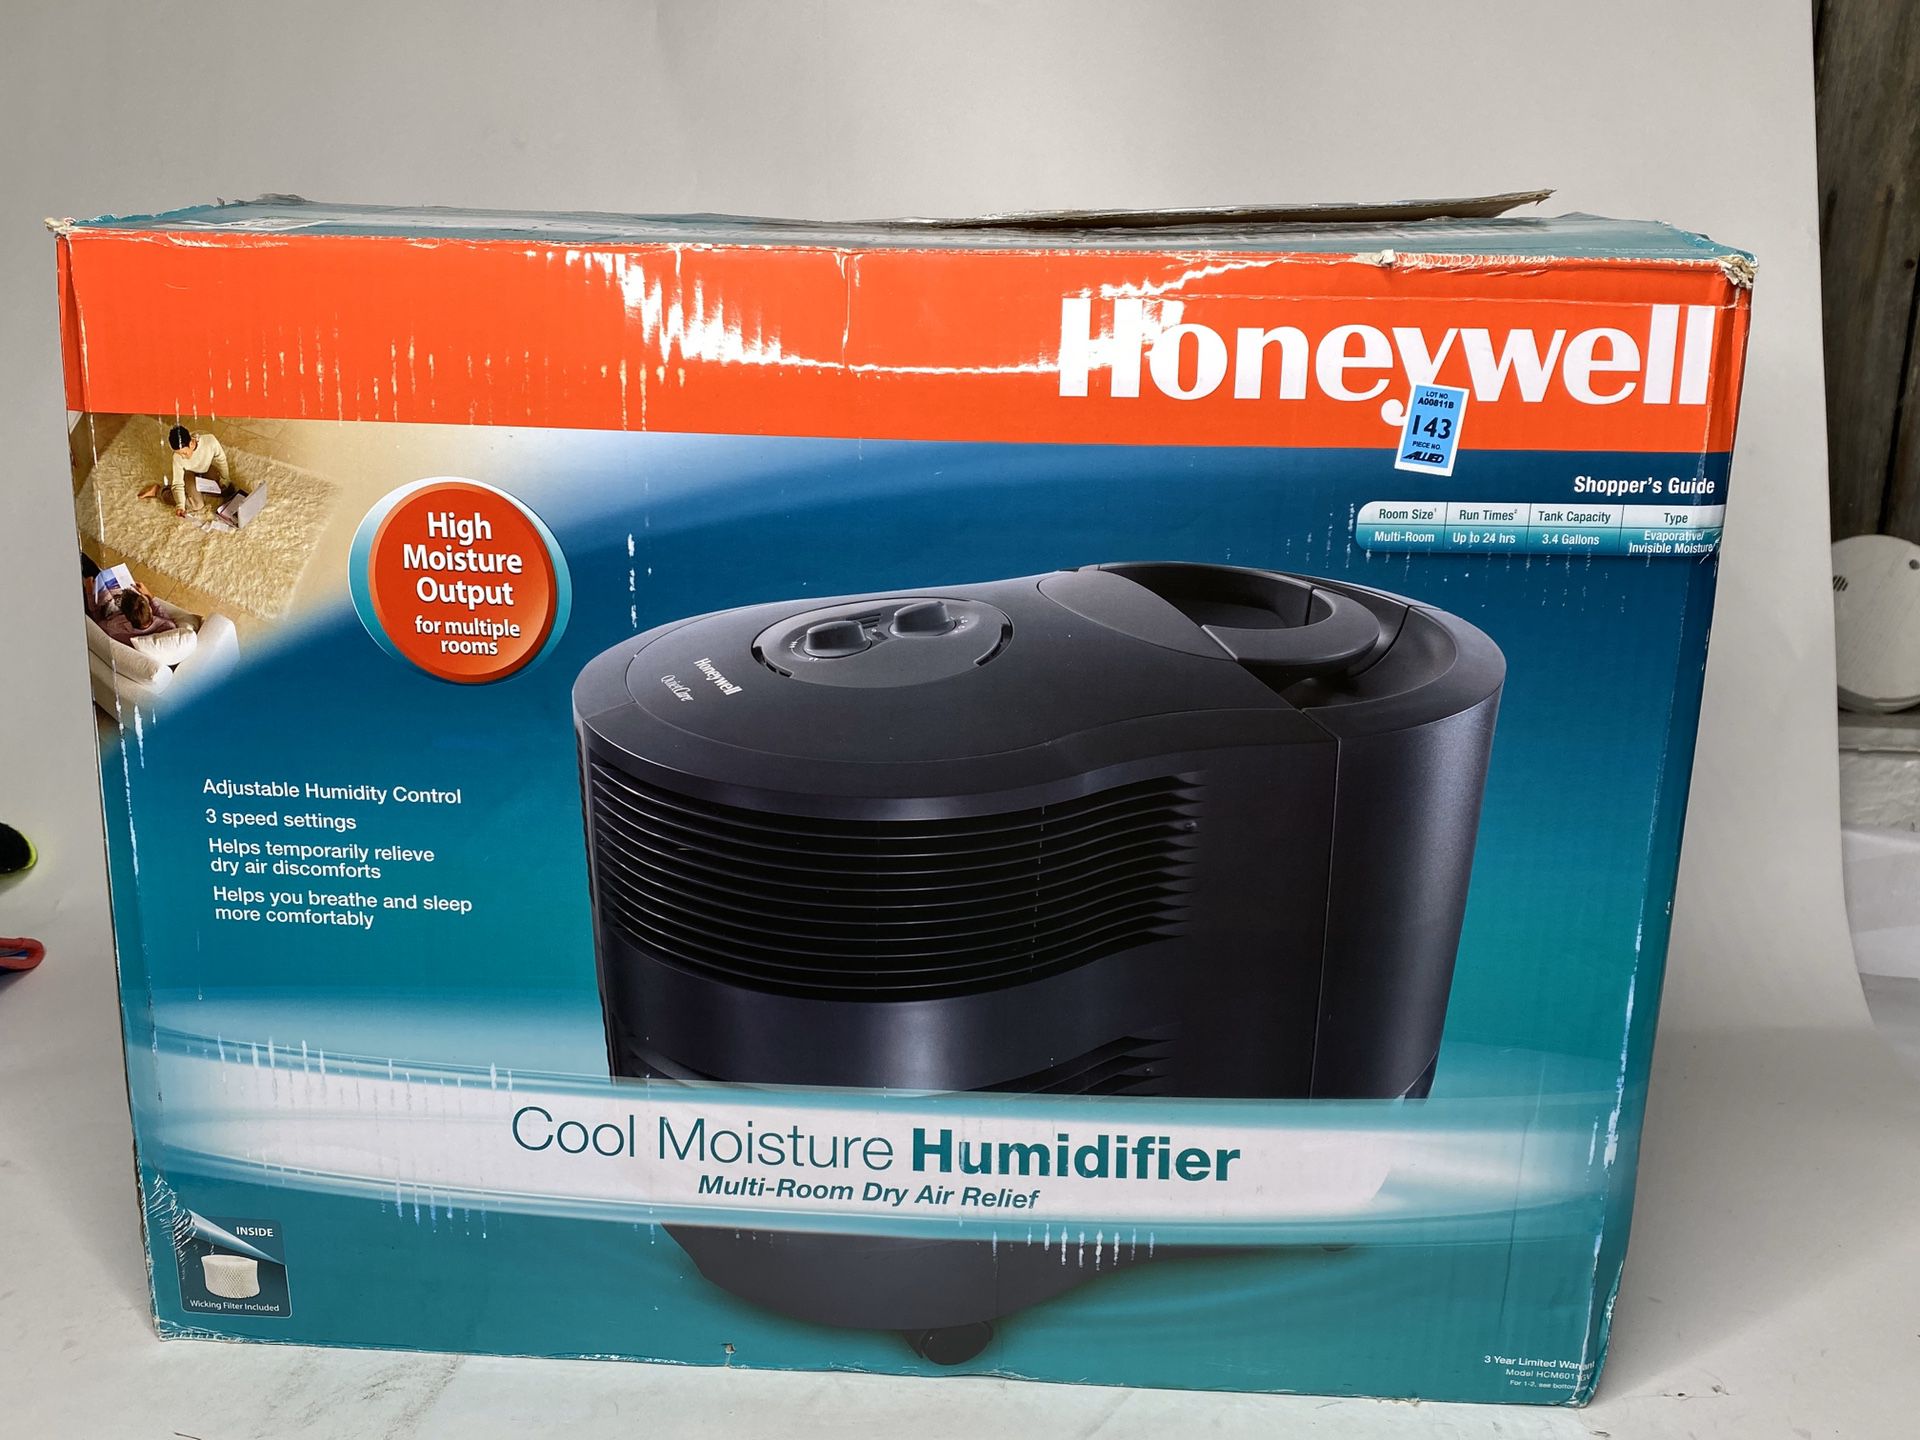 Cool Moisture Humidifier Multi Room Dry Air Relief by Honeywell